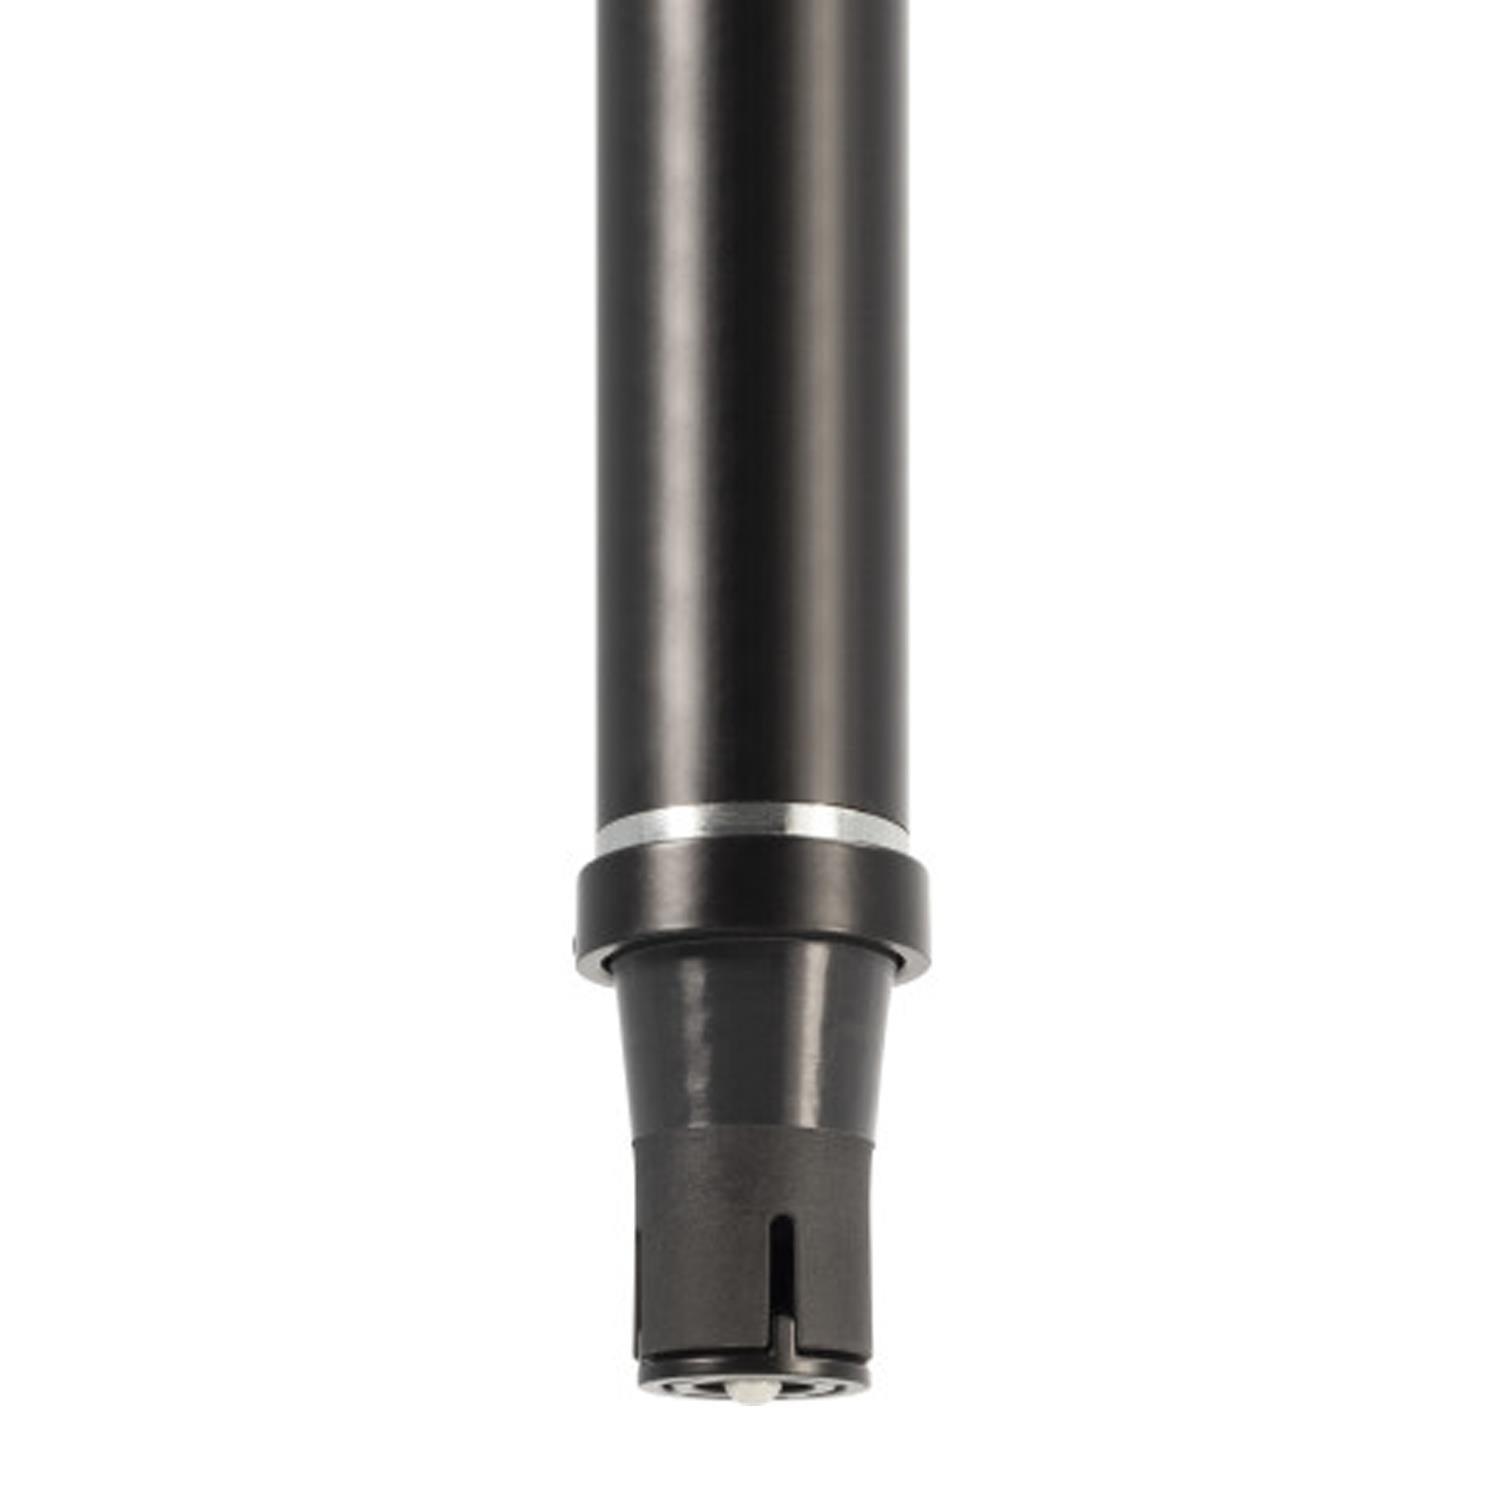 Ultimate Support SP-100 Air-Powered Speaker Pole (Single) - DY Pro Audio